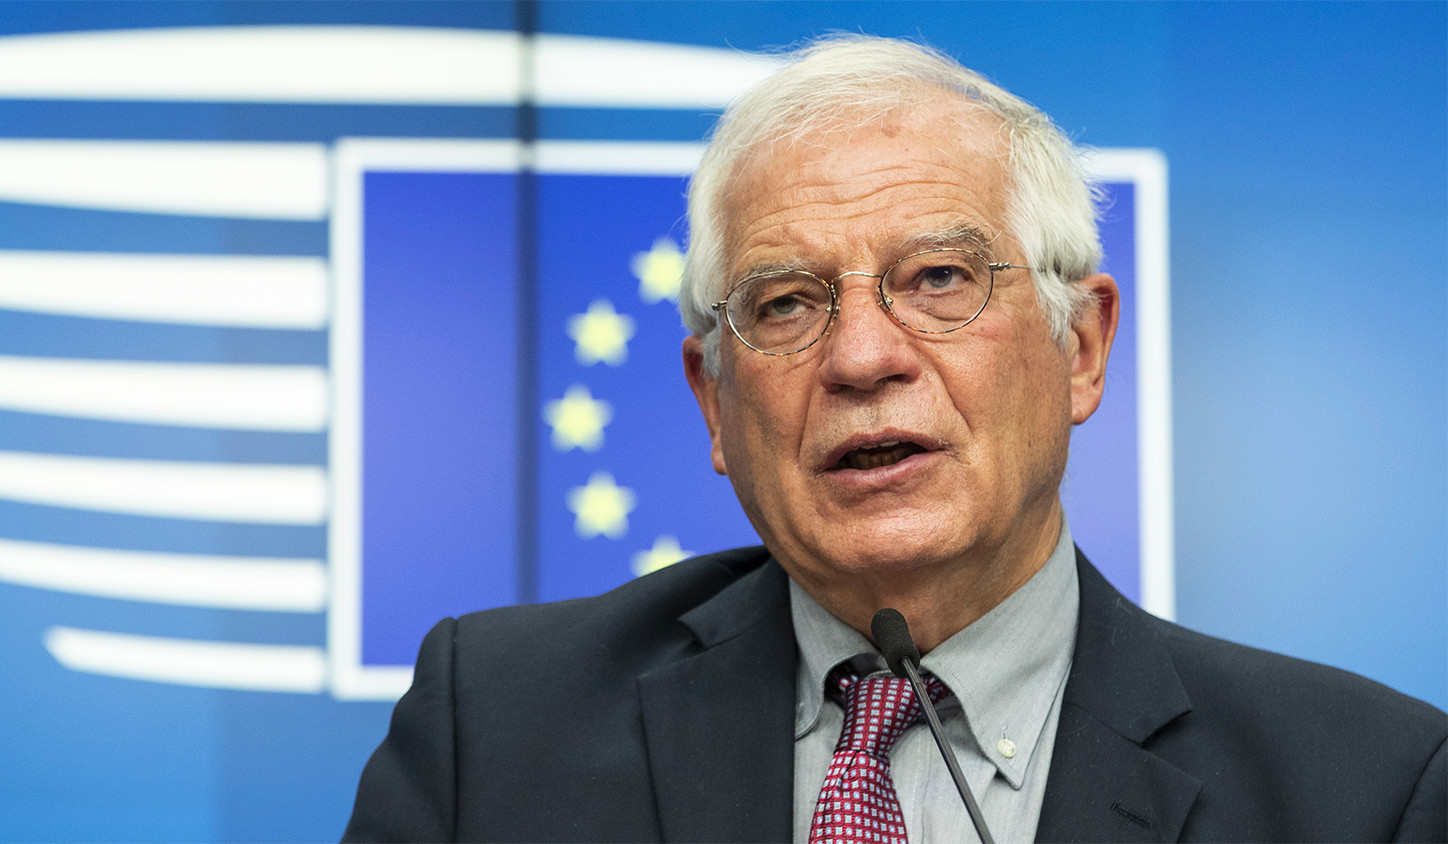 EU Monitoring Capacity to Armenia would complete its activities, Borrell